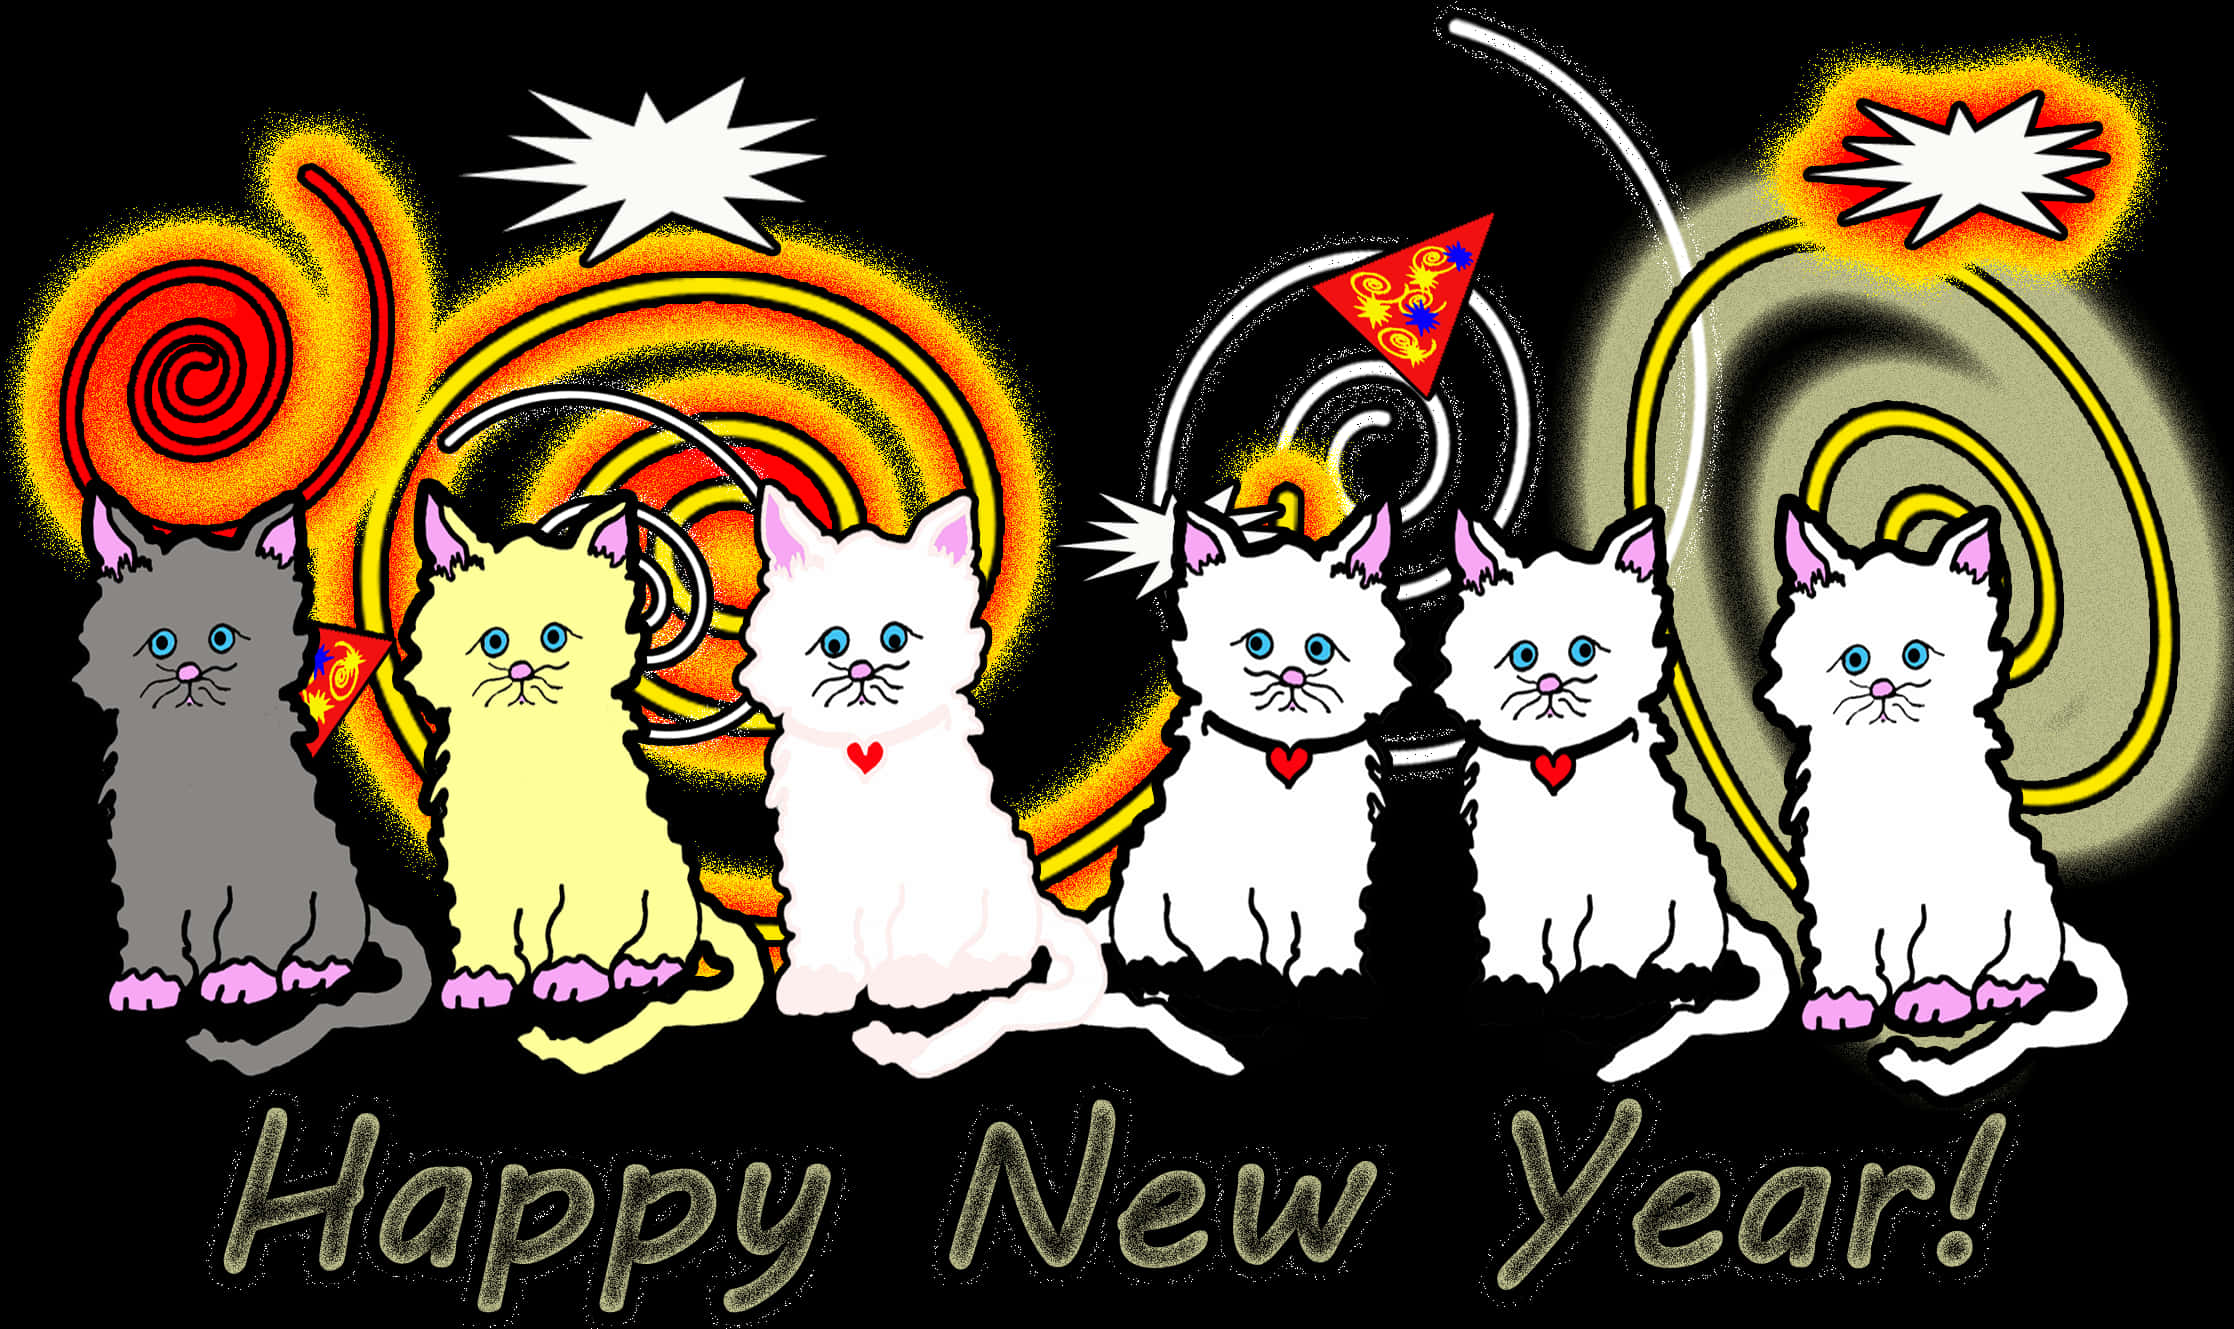 A Group Of Cats With A Happy New Year Text